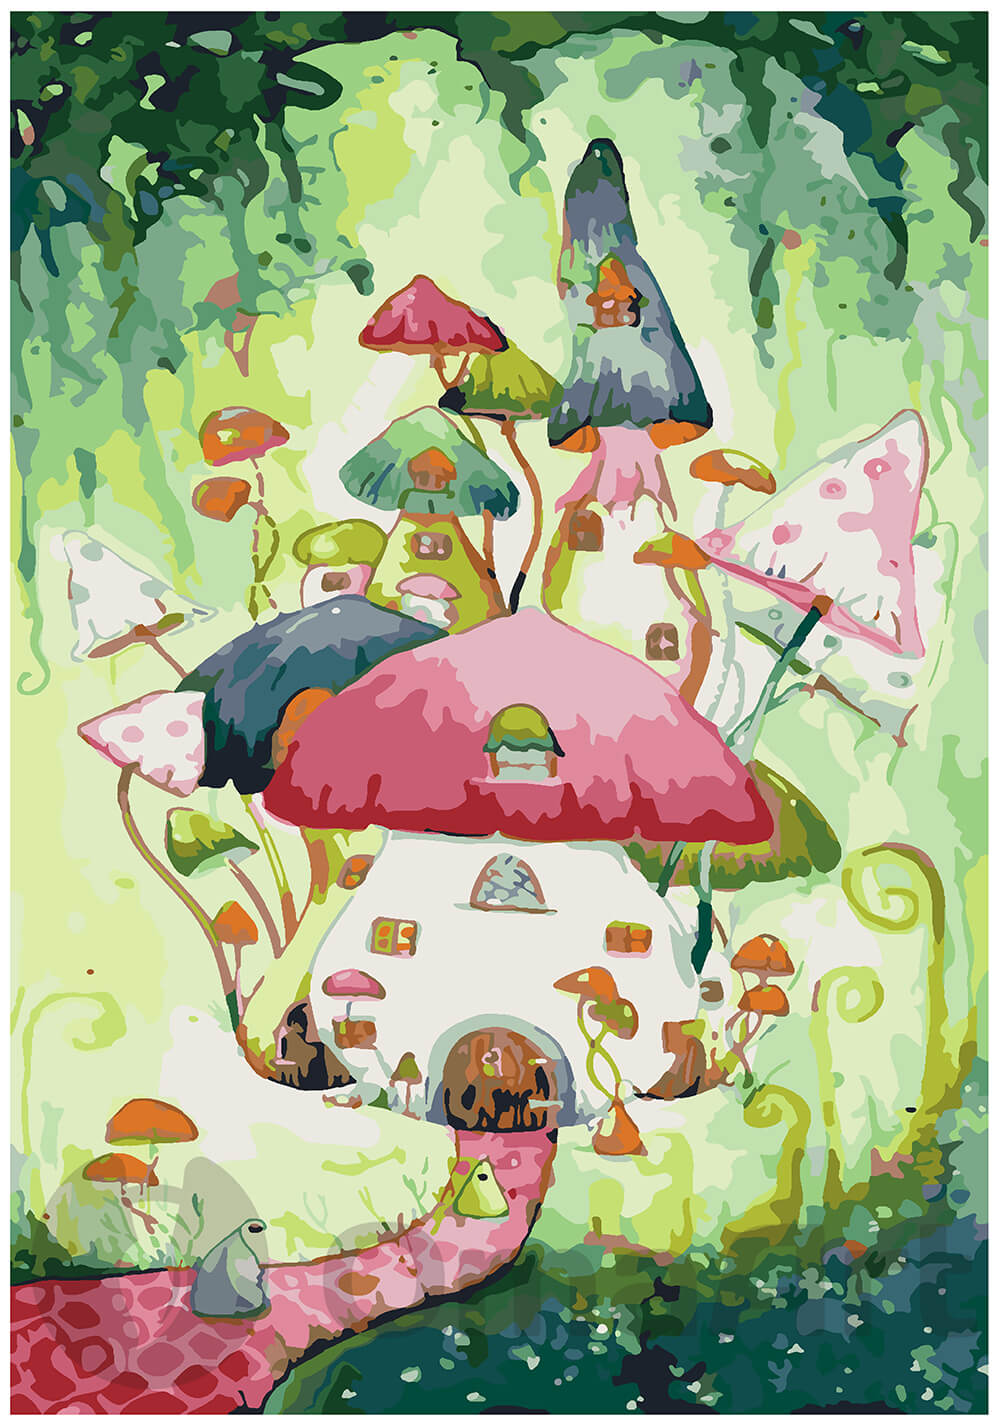 Paint by Numbers "Enchanted Mushroom House